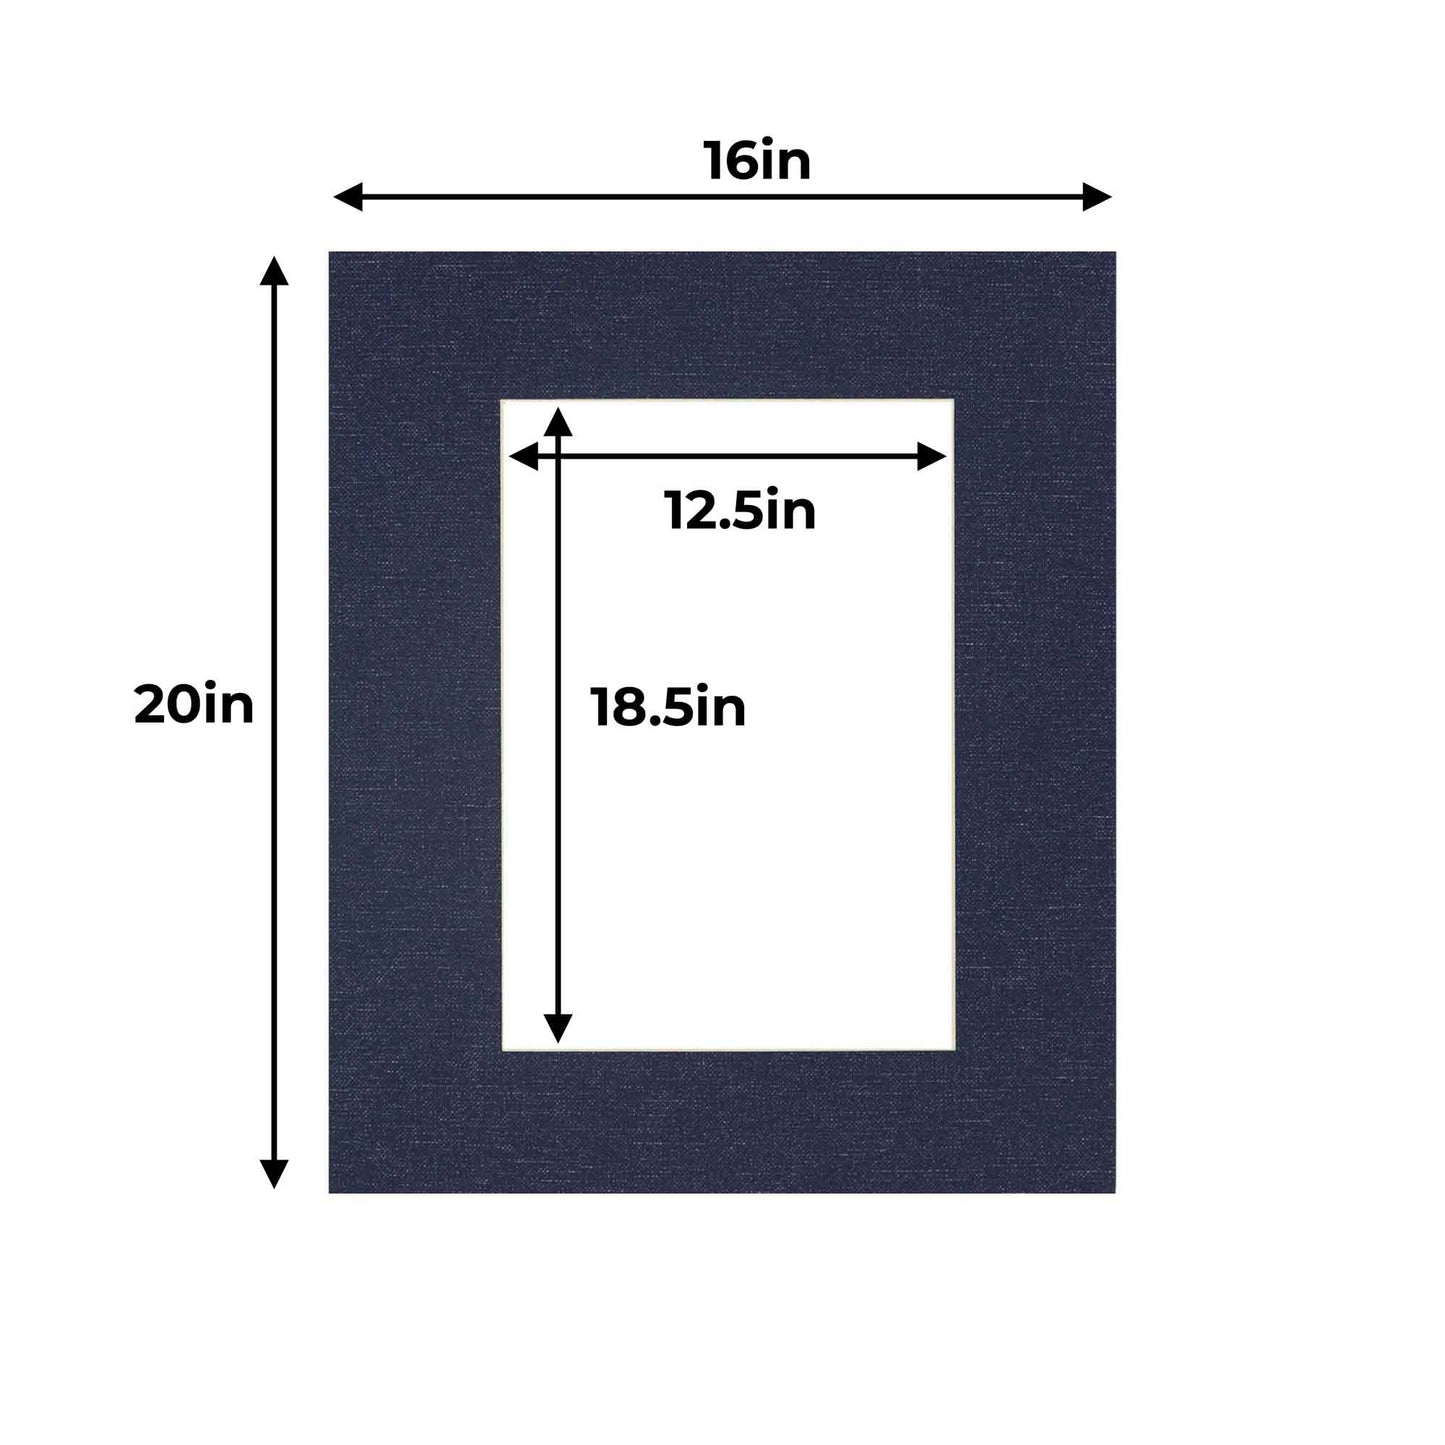 Pack of 25 Navy Canvas Texture Precut Acid-Free Matboards